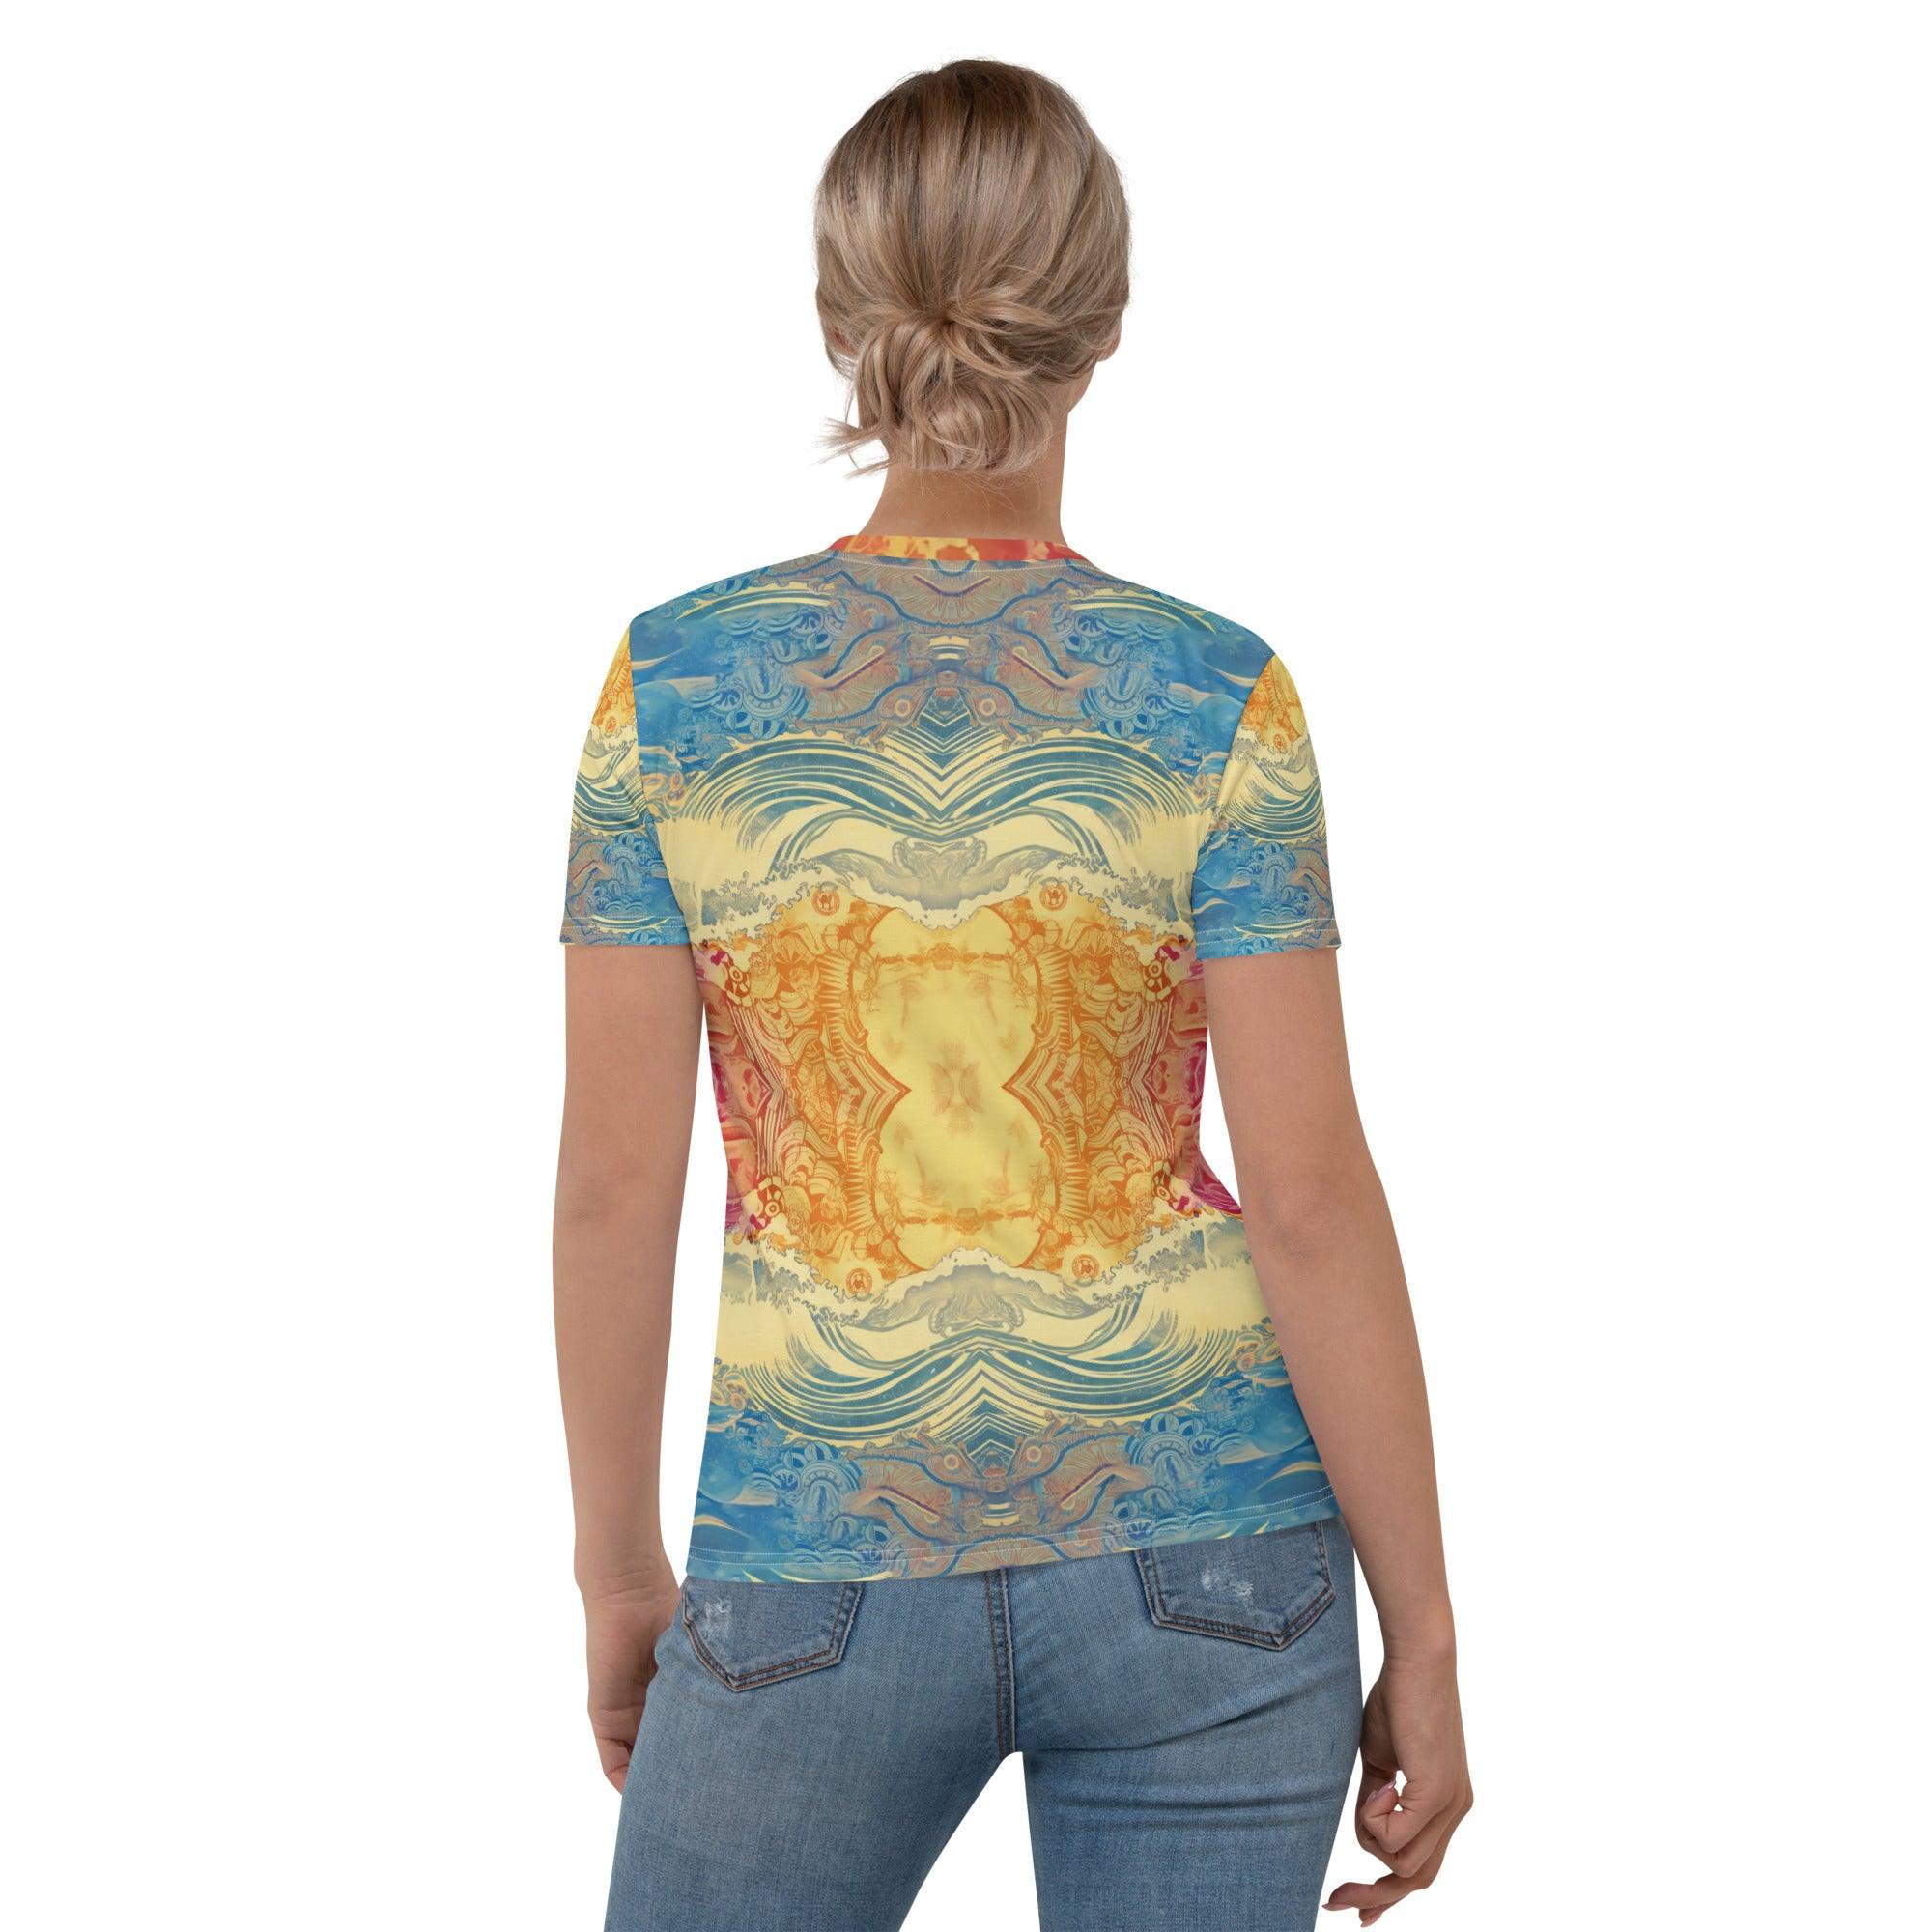 Catching Waves All-Over Print Women's Crew Neck T-Shirt - Beyond T-shirts